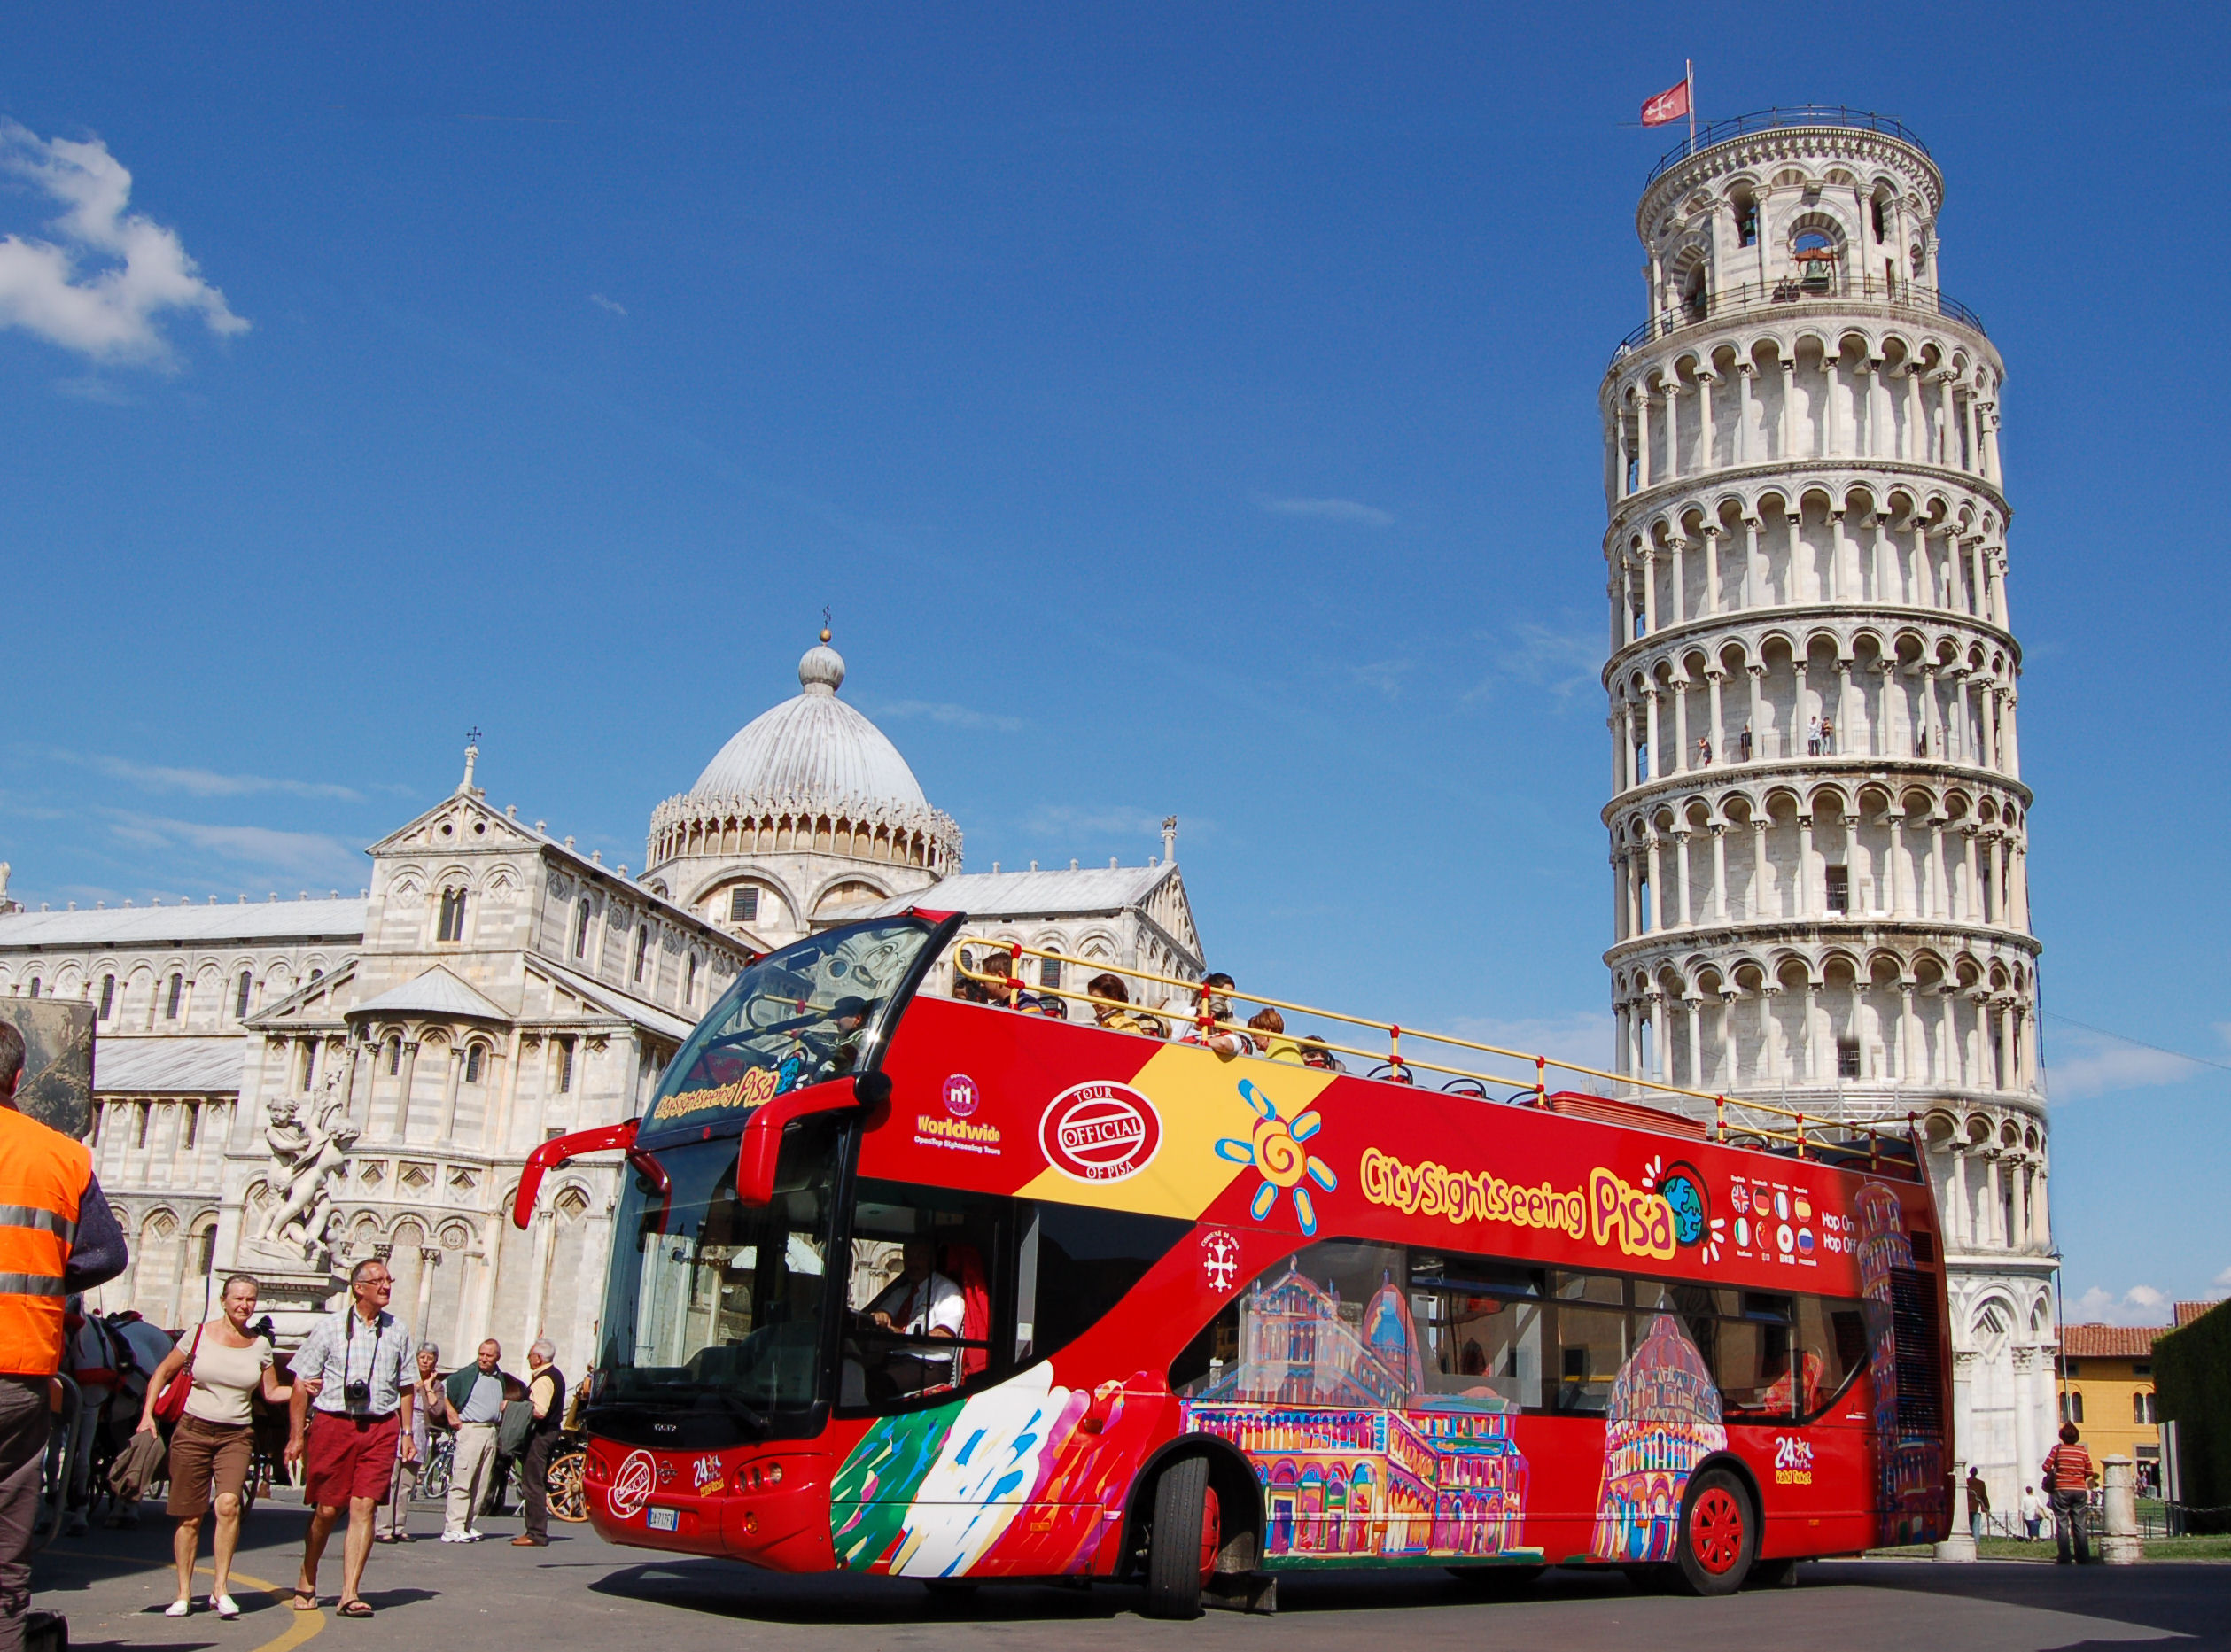 10 Reasons to Book Your City Tour with City Sightseeing | Lists 4U ...